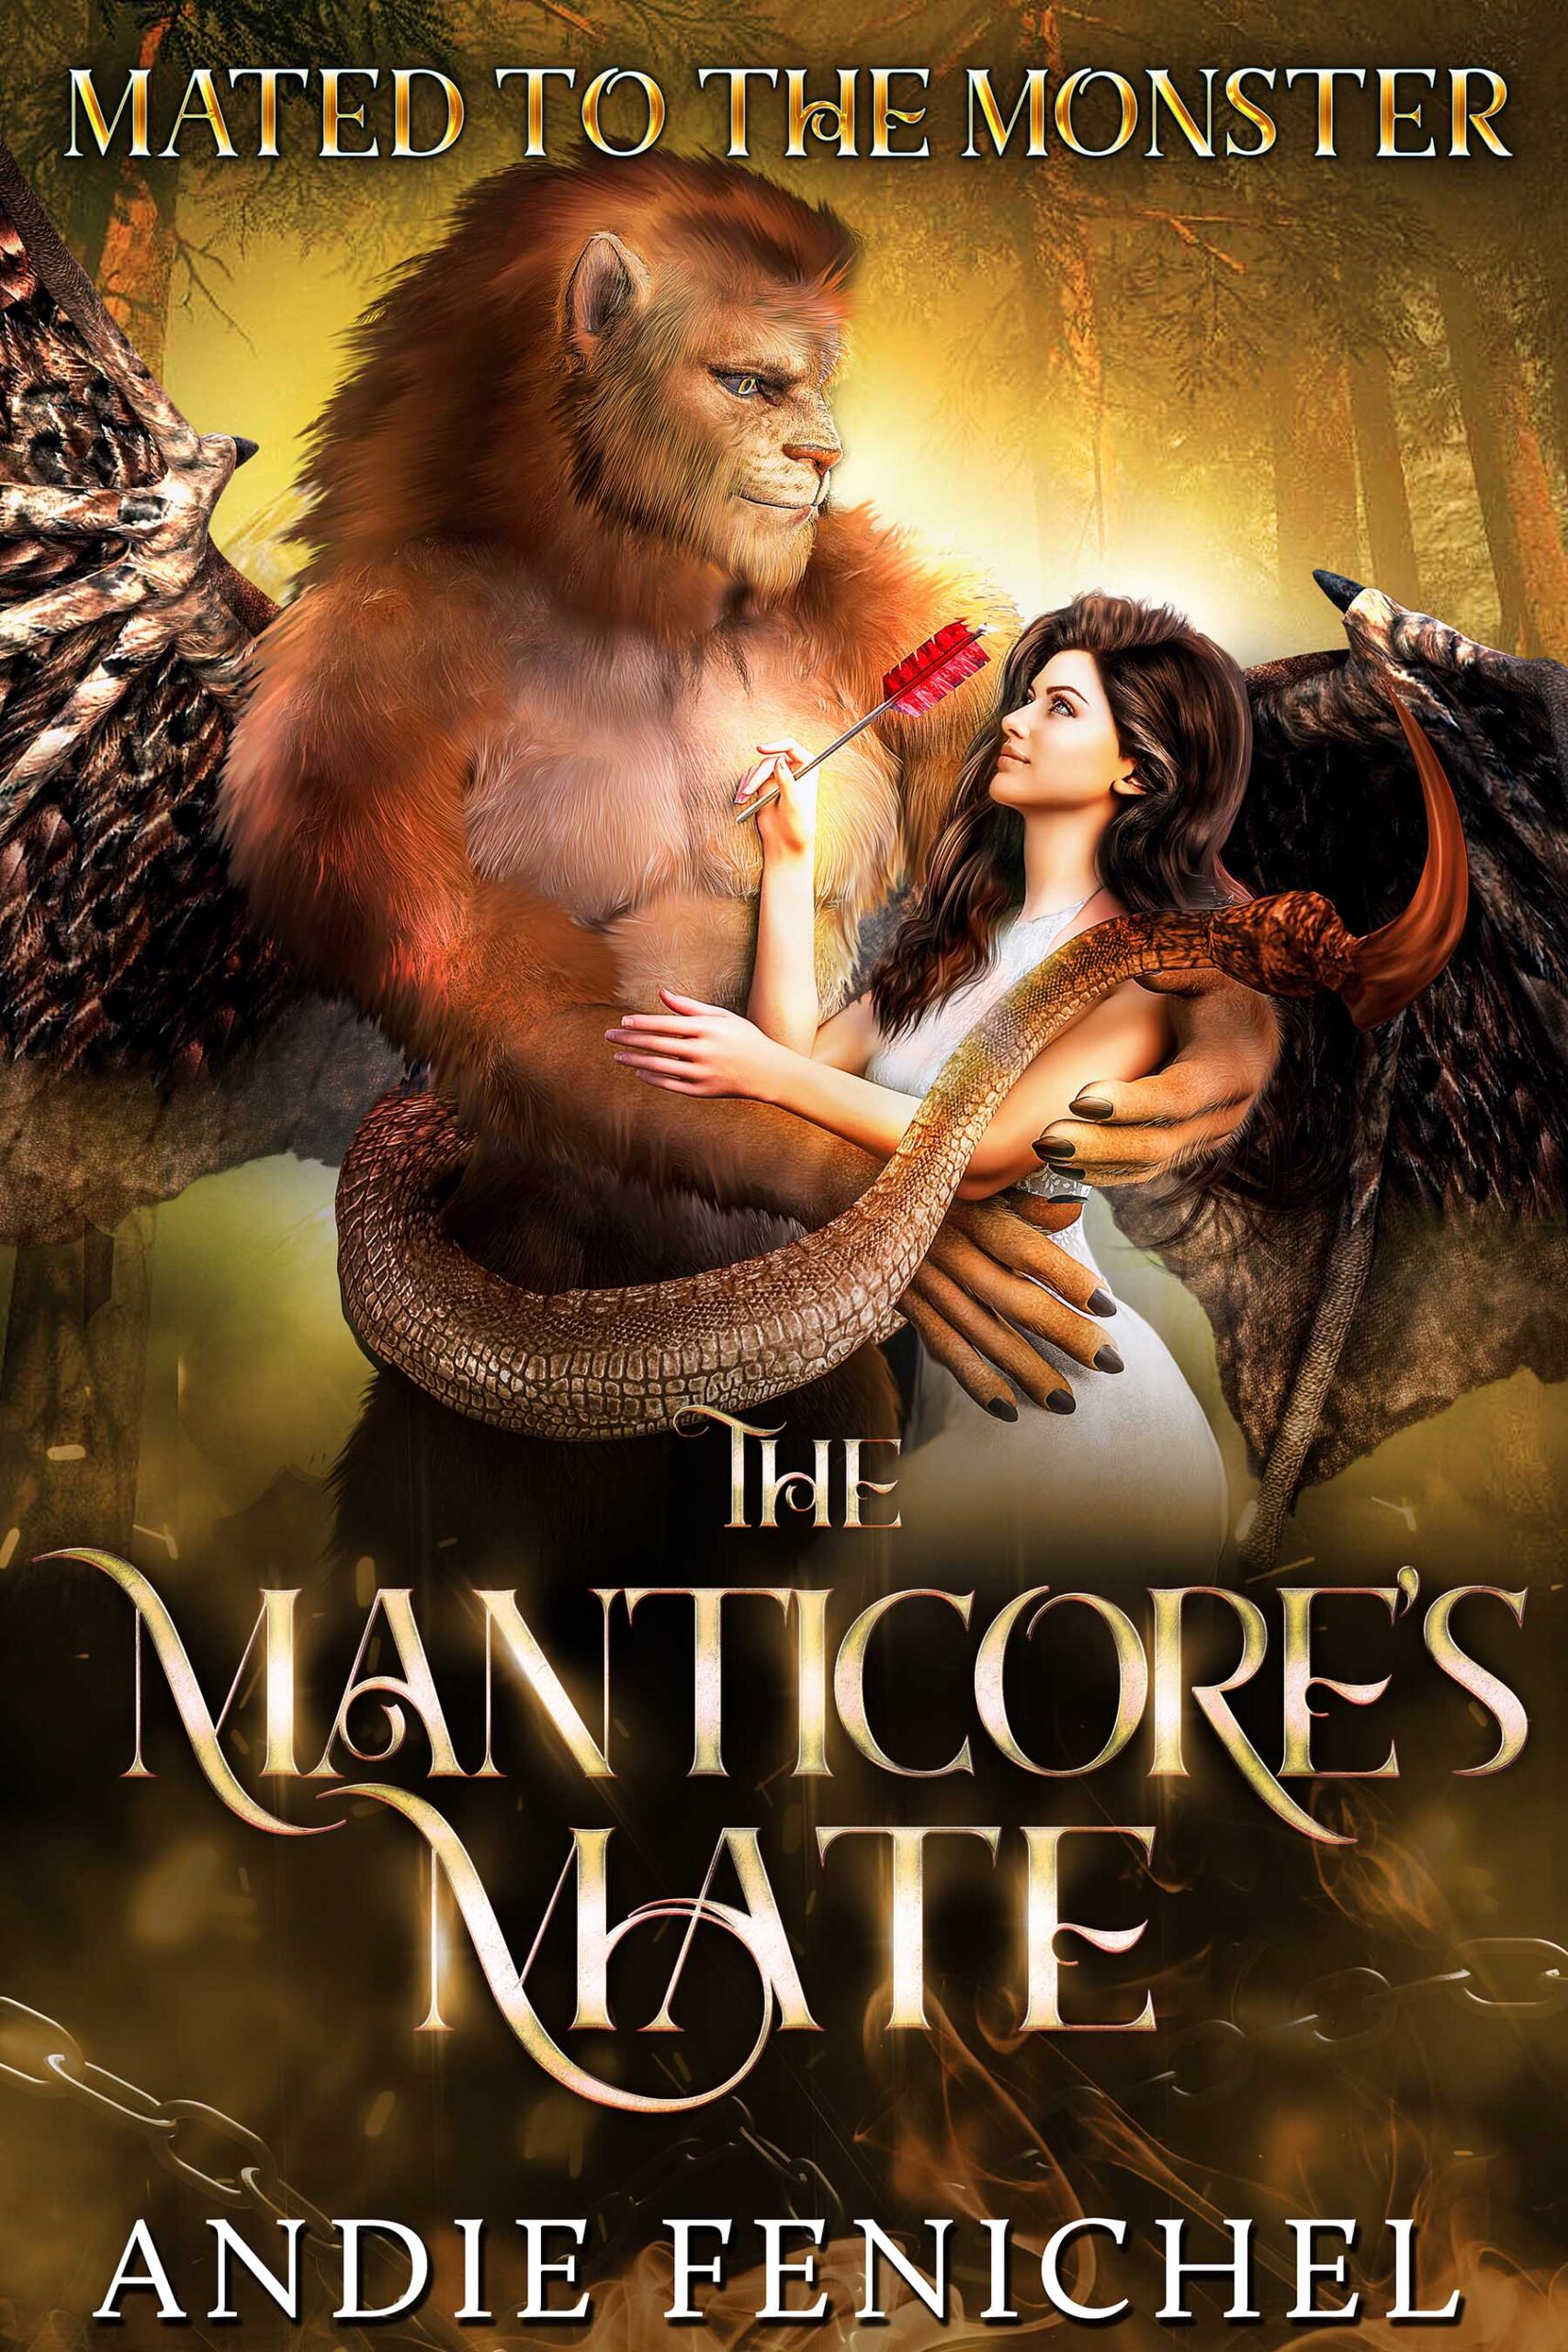 The Manticore's Mate by Andie Fenichel book cover